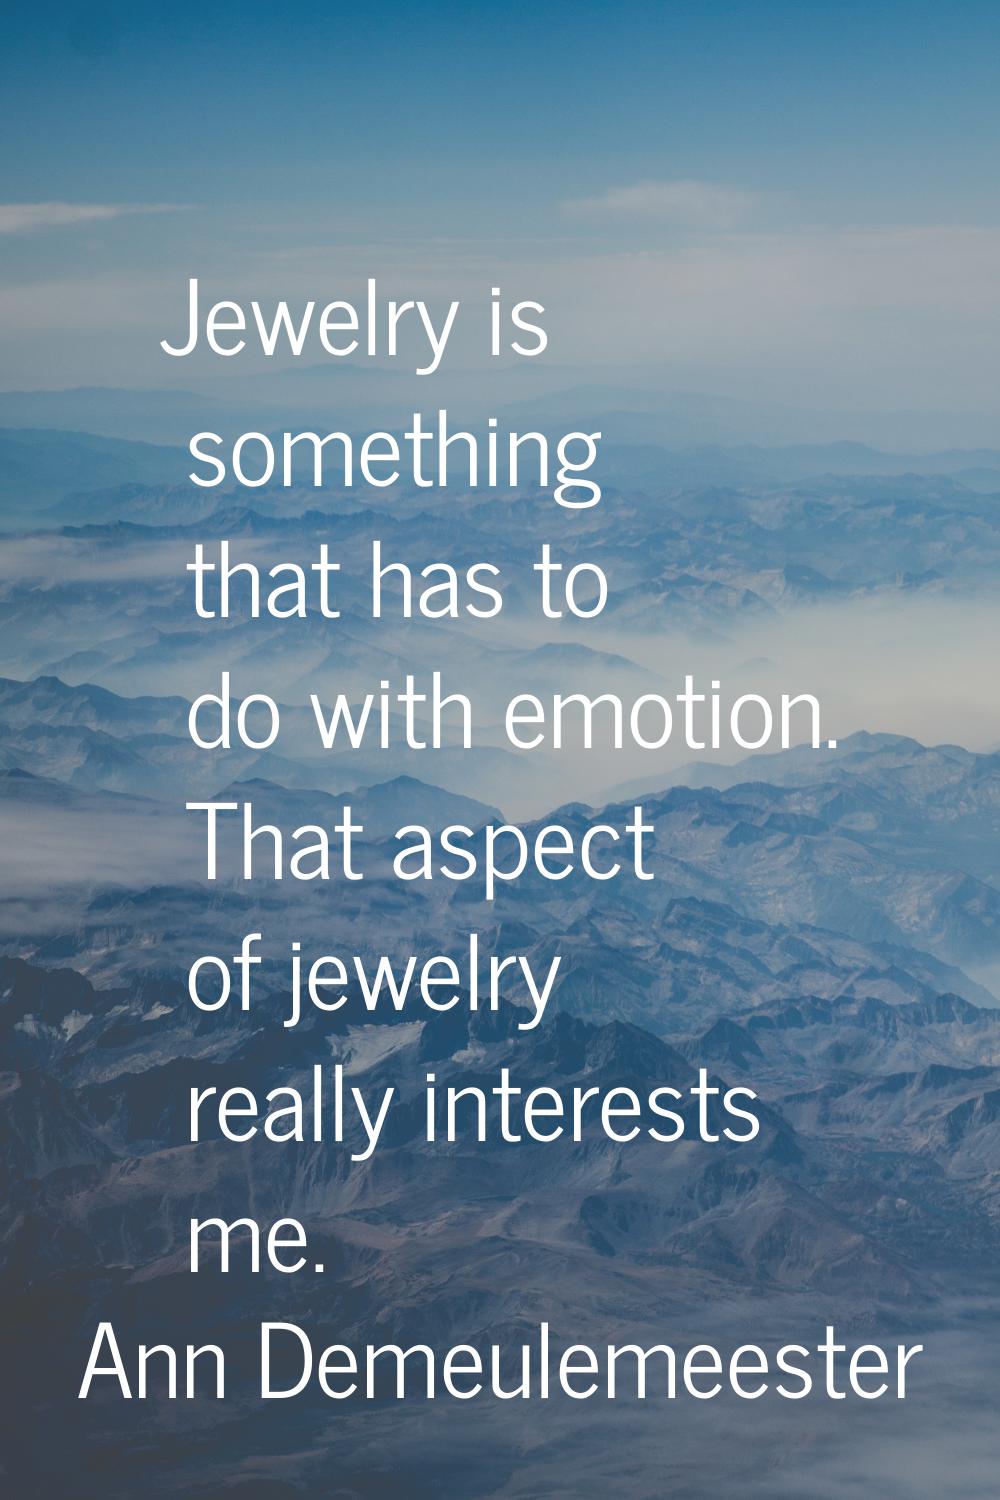 Jewelry is something that has to do with emotion. That aspect of jewelry really interests me.